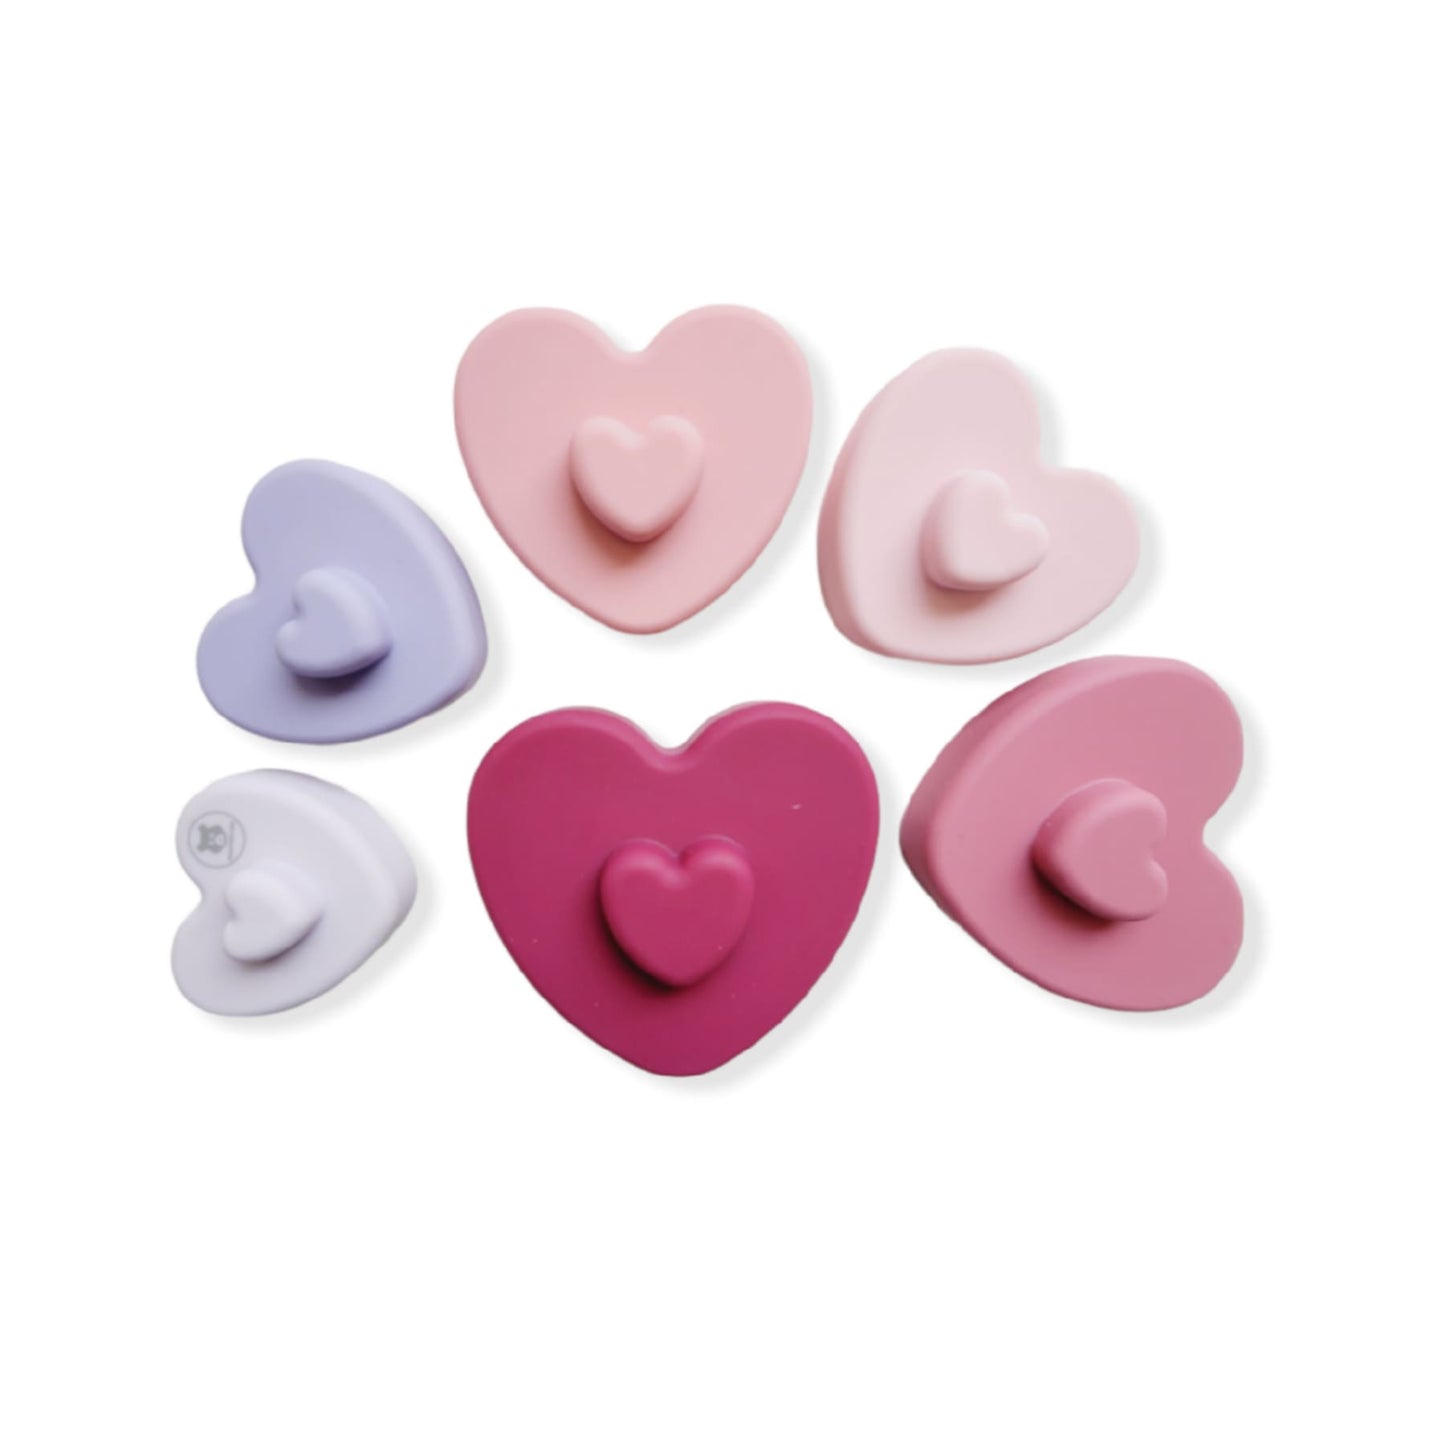 heart shaped stacker toys for babies and kids - Hunny bubba kids